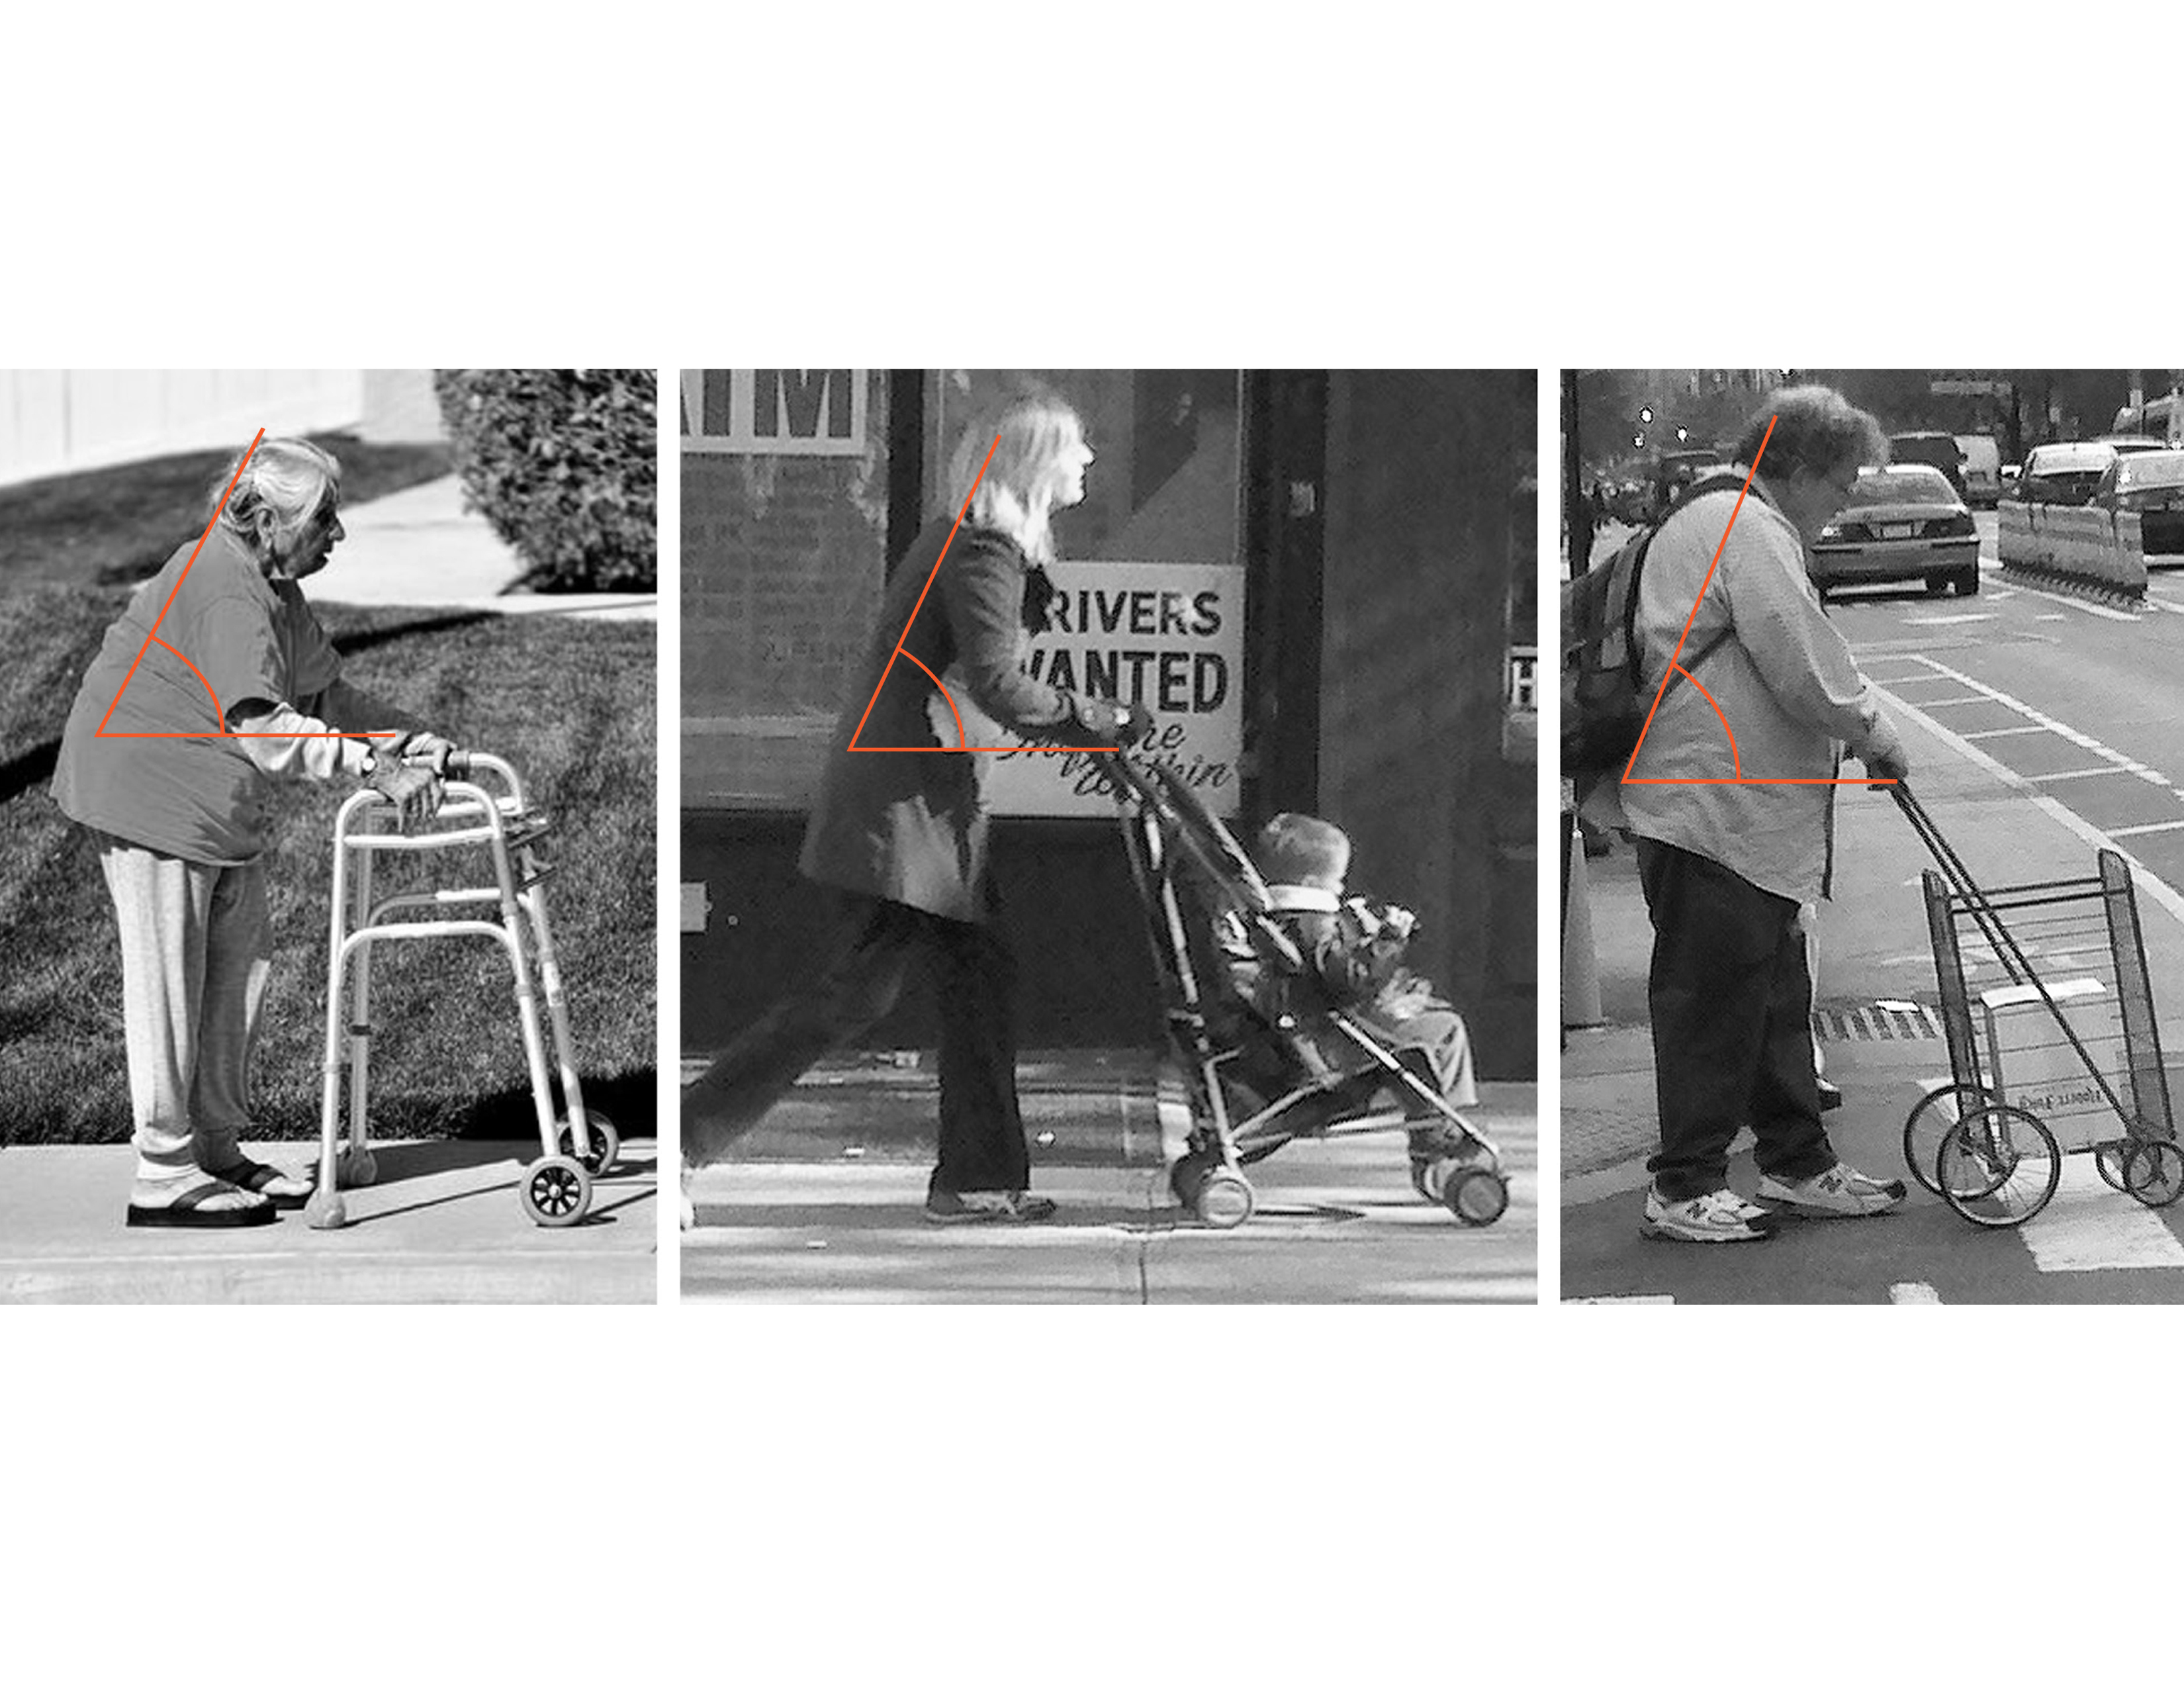 Three images show similar movements among gear-users in cities: a walker, a woman pushing a stroller, and a woman pushing a wire-frame grocery cart. All three must bend over their tools in a similar fashion.